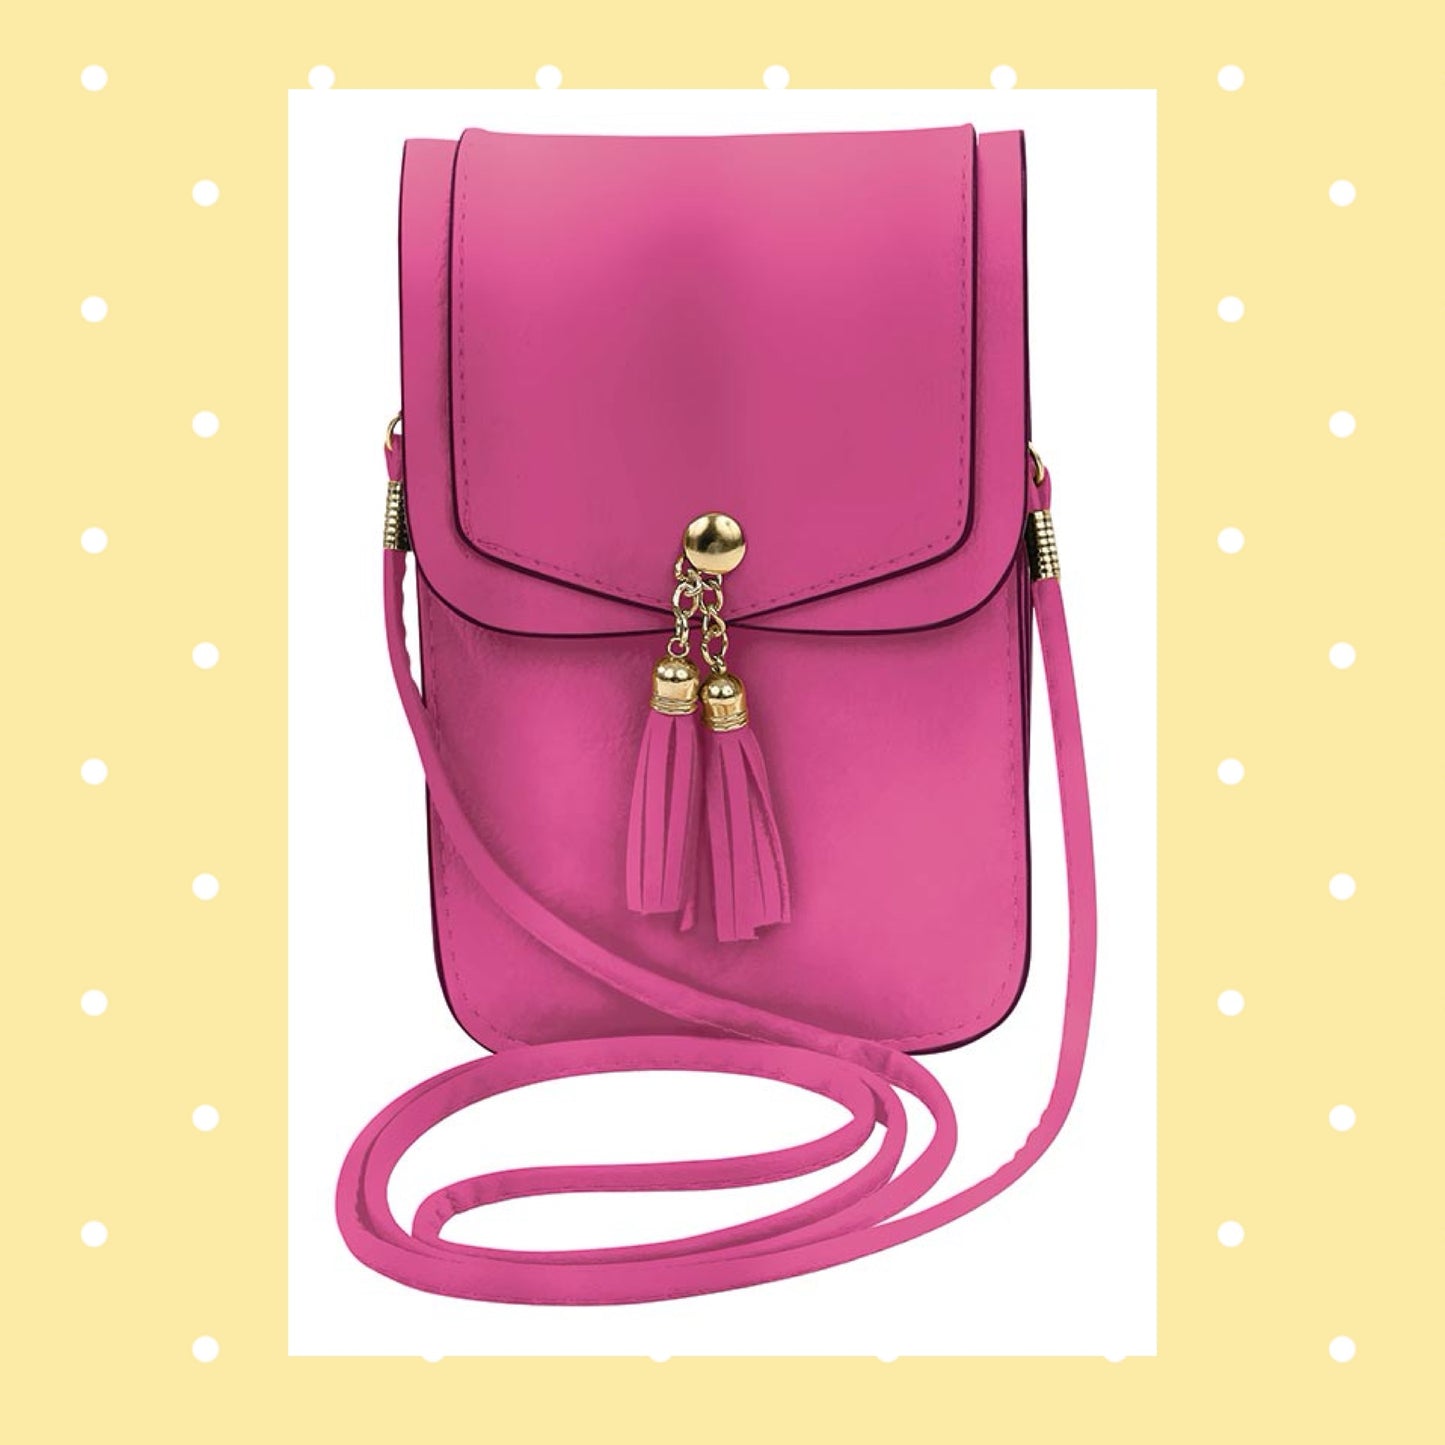 Crossbody Cell Phone Bag - 6 colors available